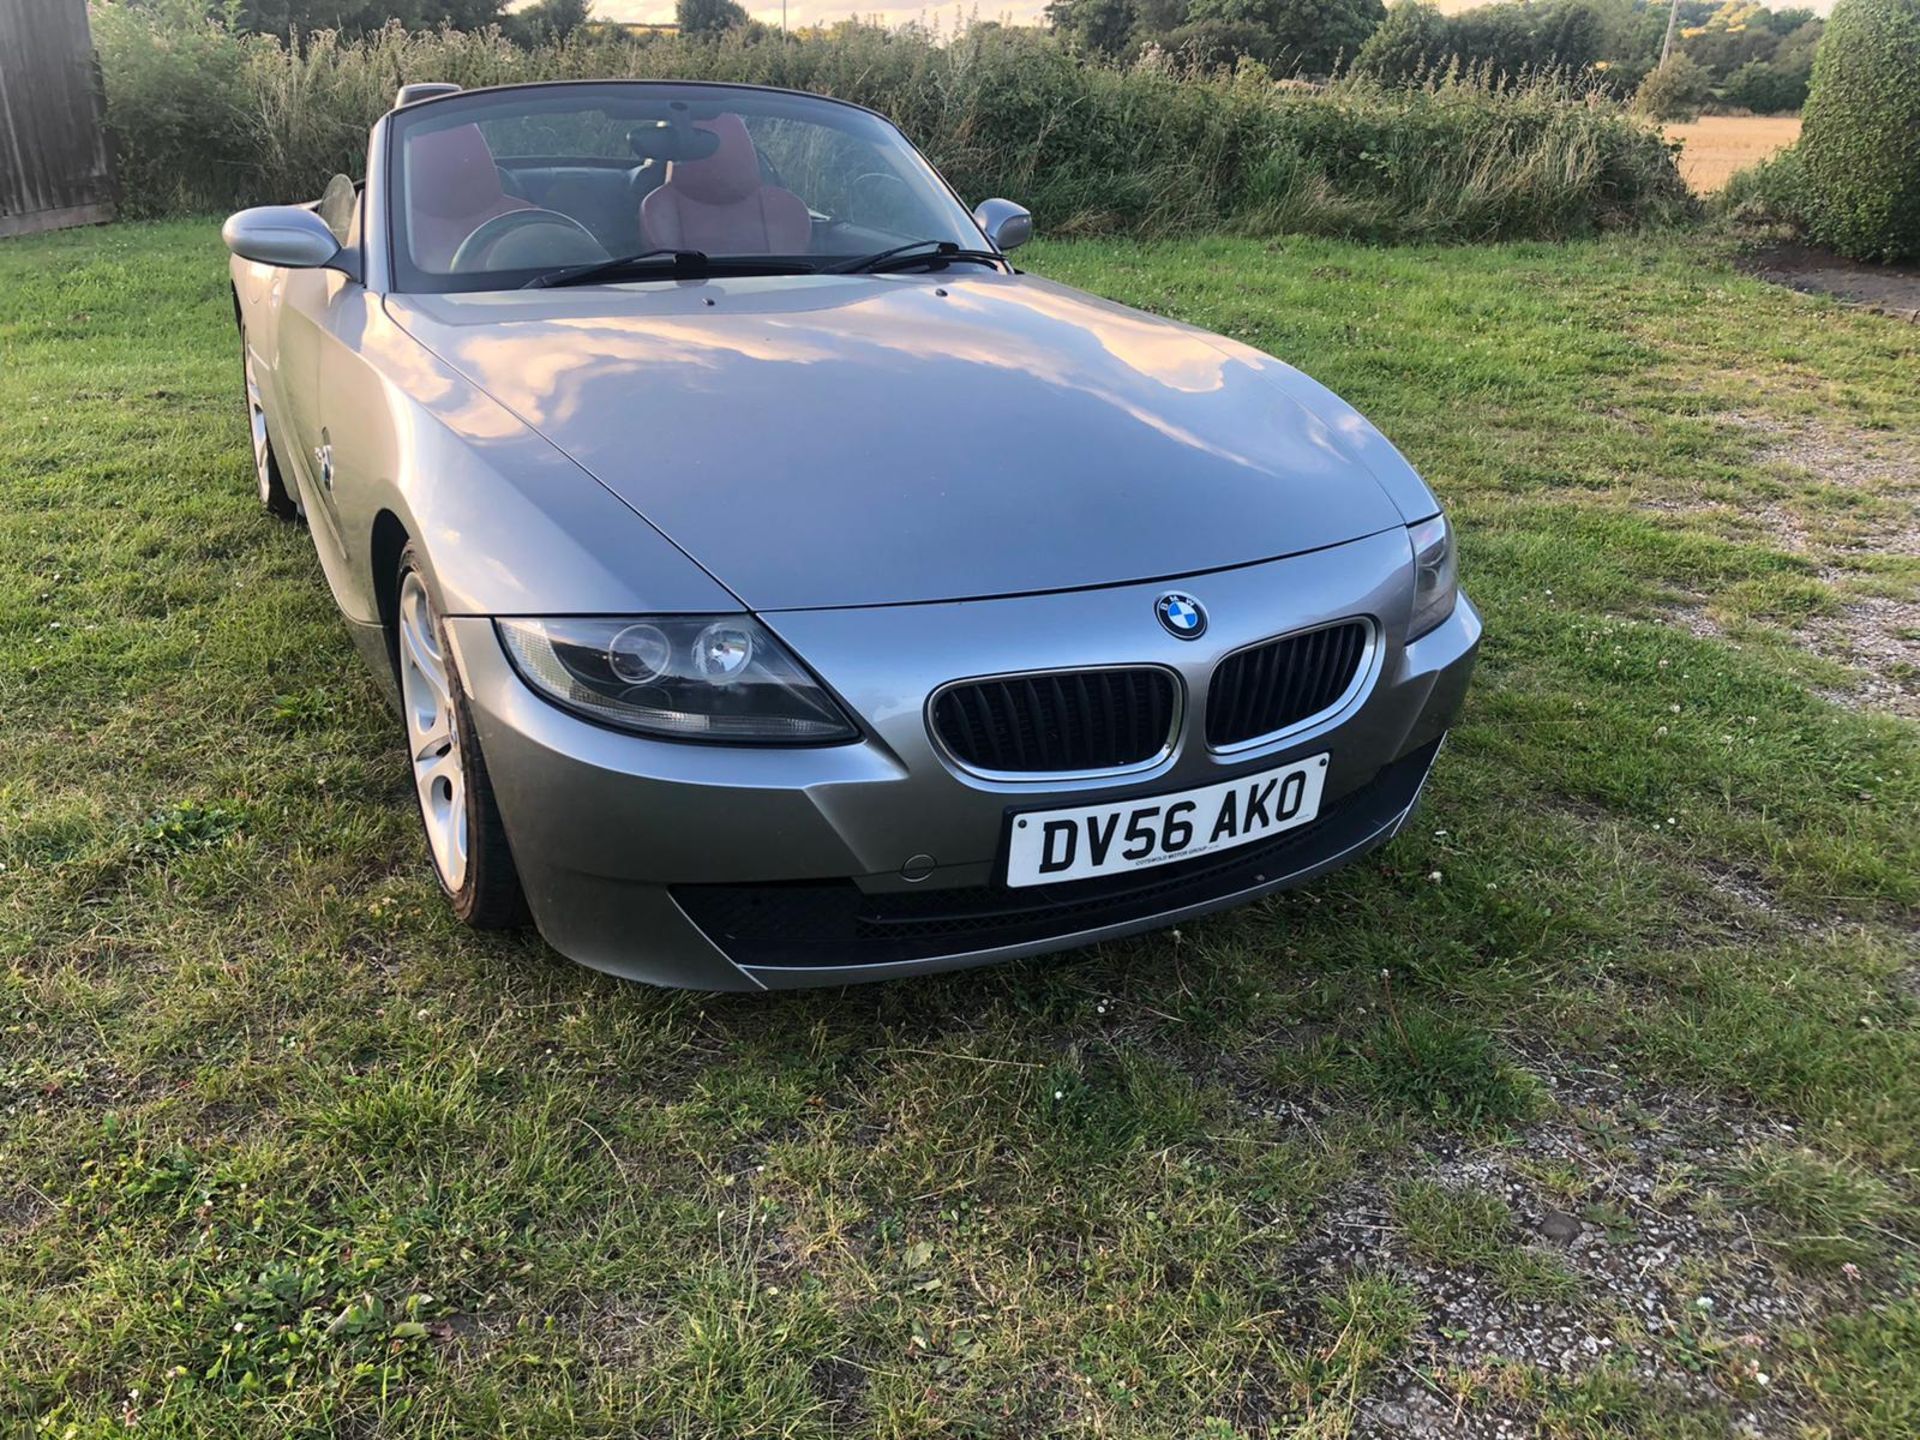 2006/56 REG BMW Z4 SPORT 2.0 PETROL GREY CONVERTIBLE, SHOWING 4 FORMER KEEPERS *NO VAT* - Image 4 of 18